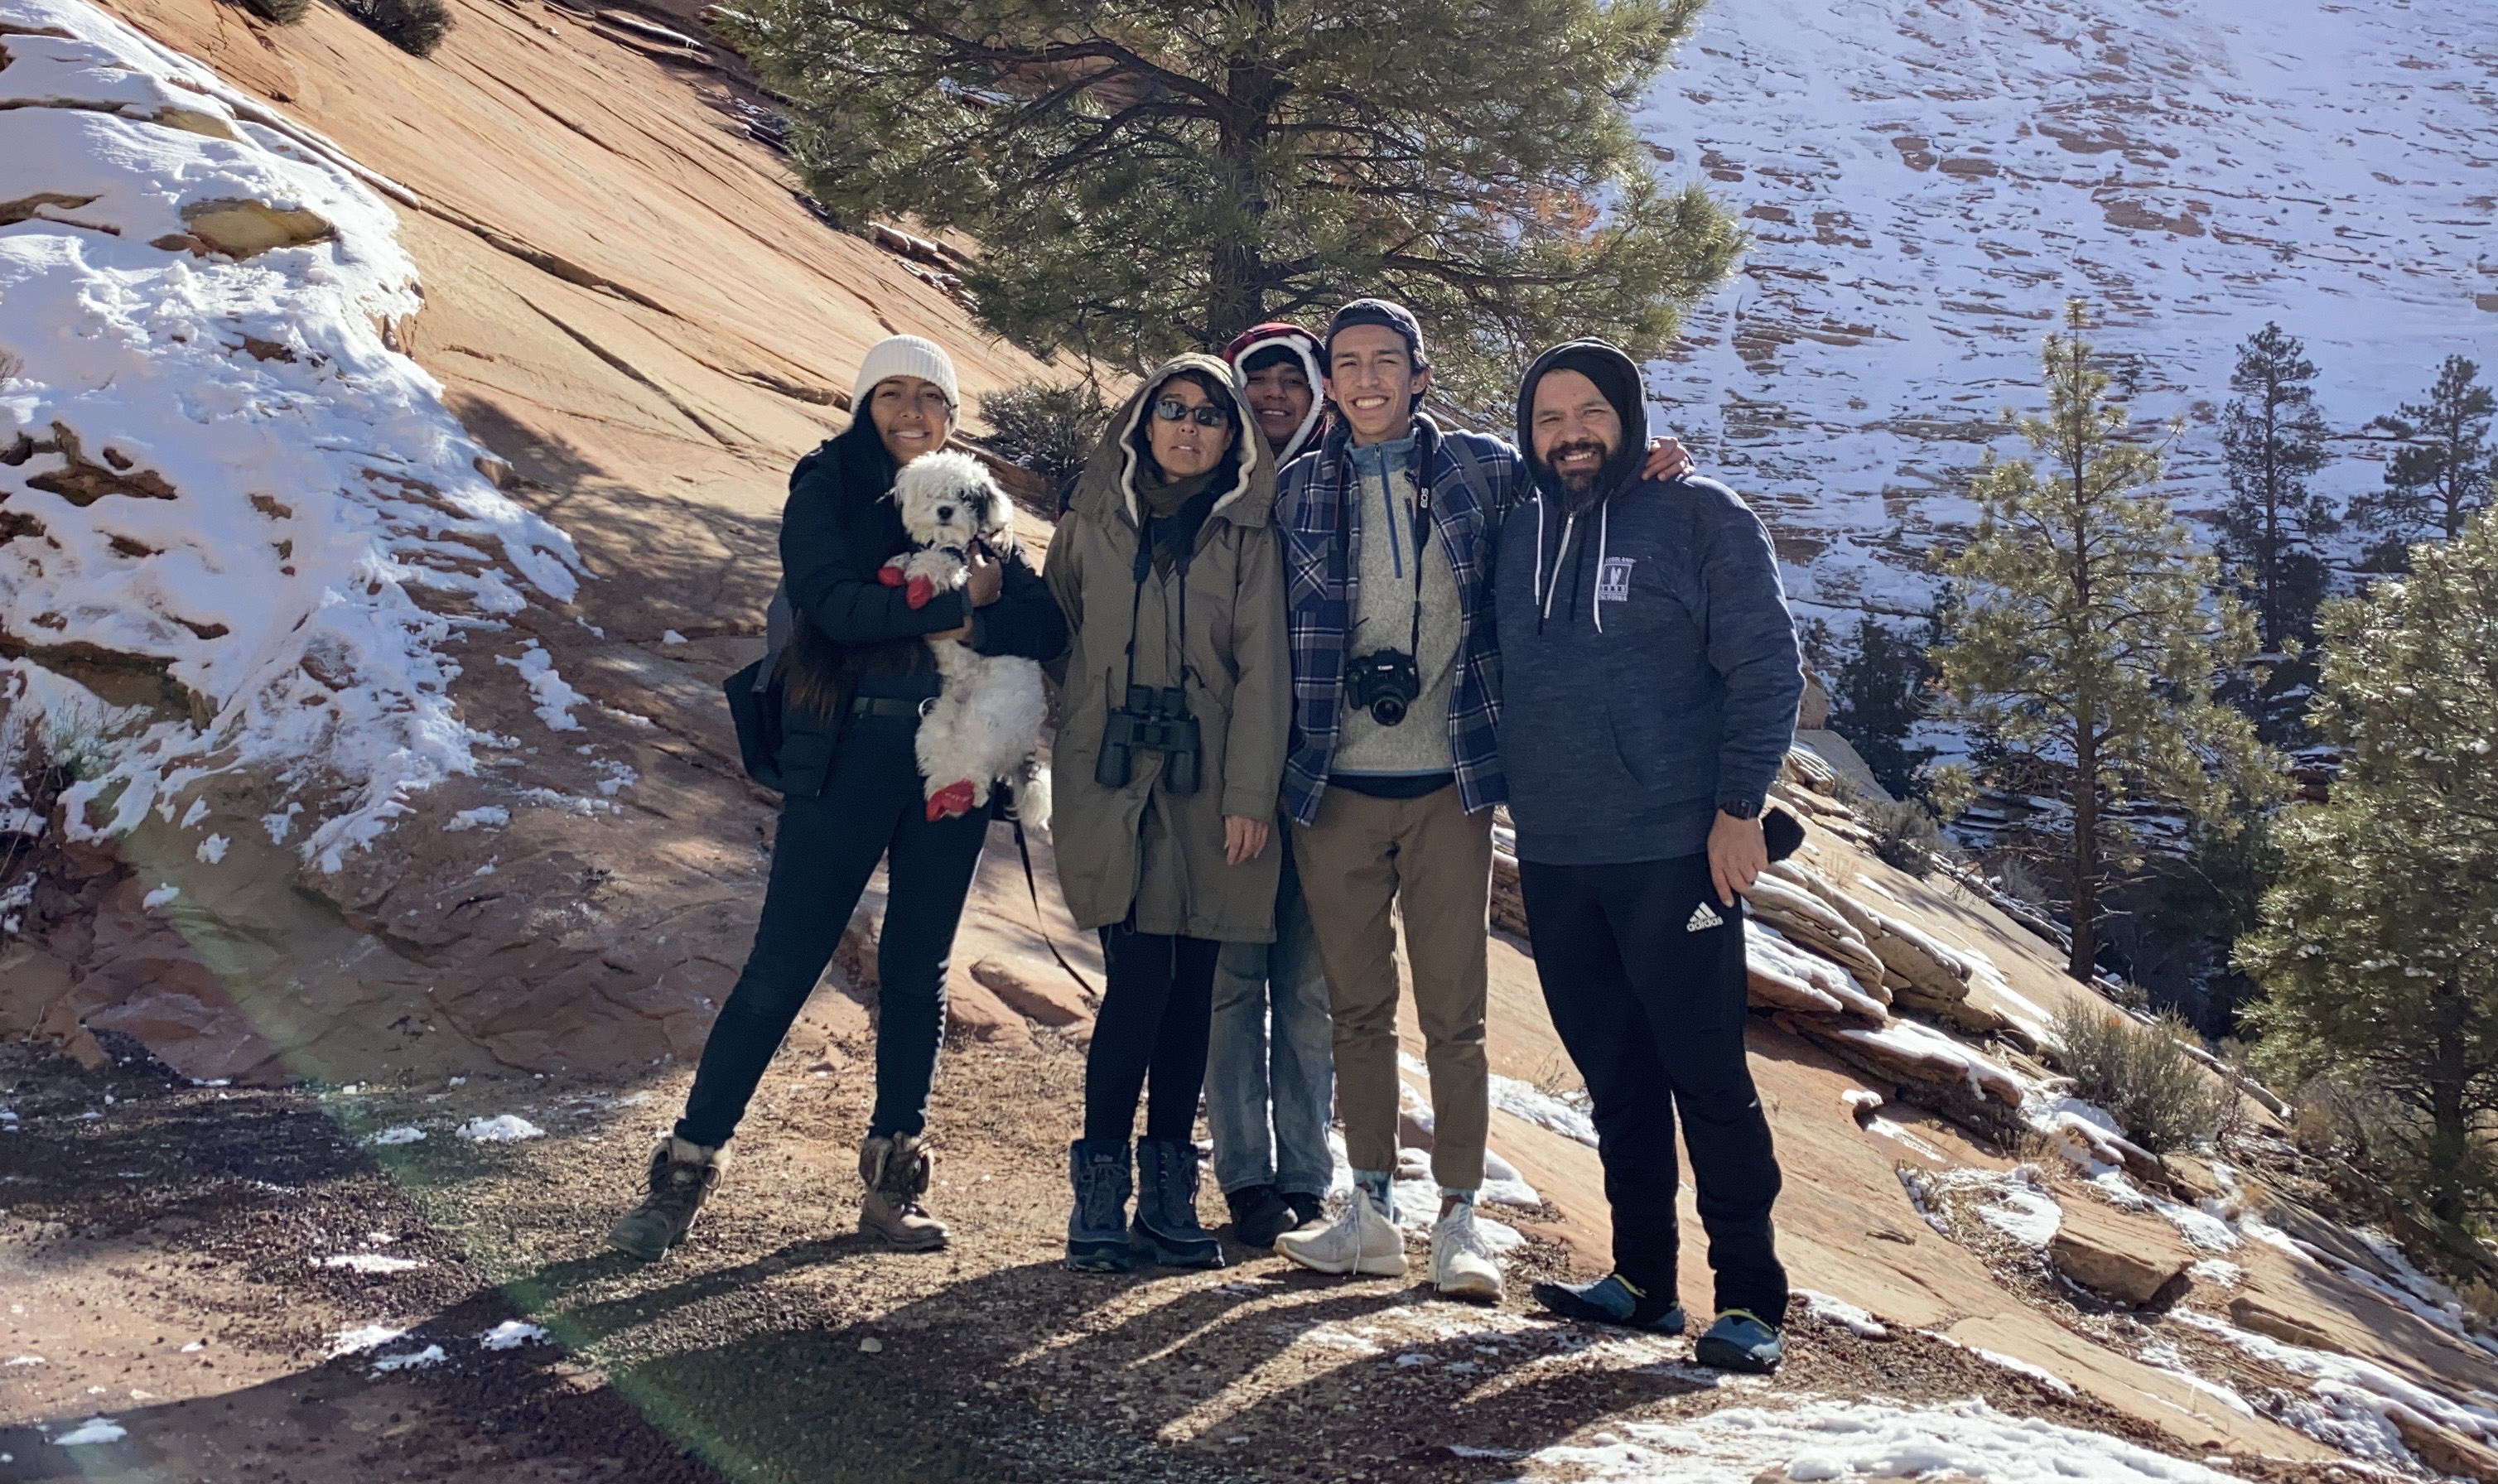 Isaac Aguilar poses with people and a dog on a snowy mountain